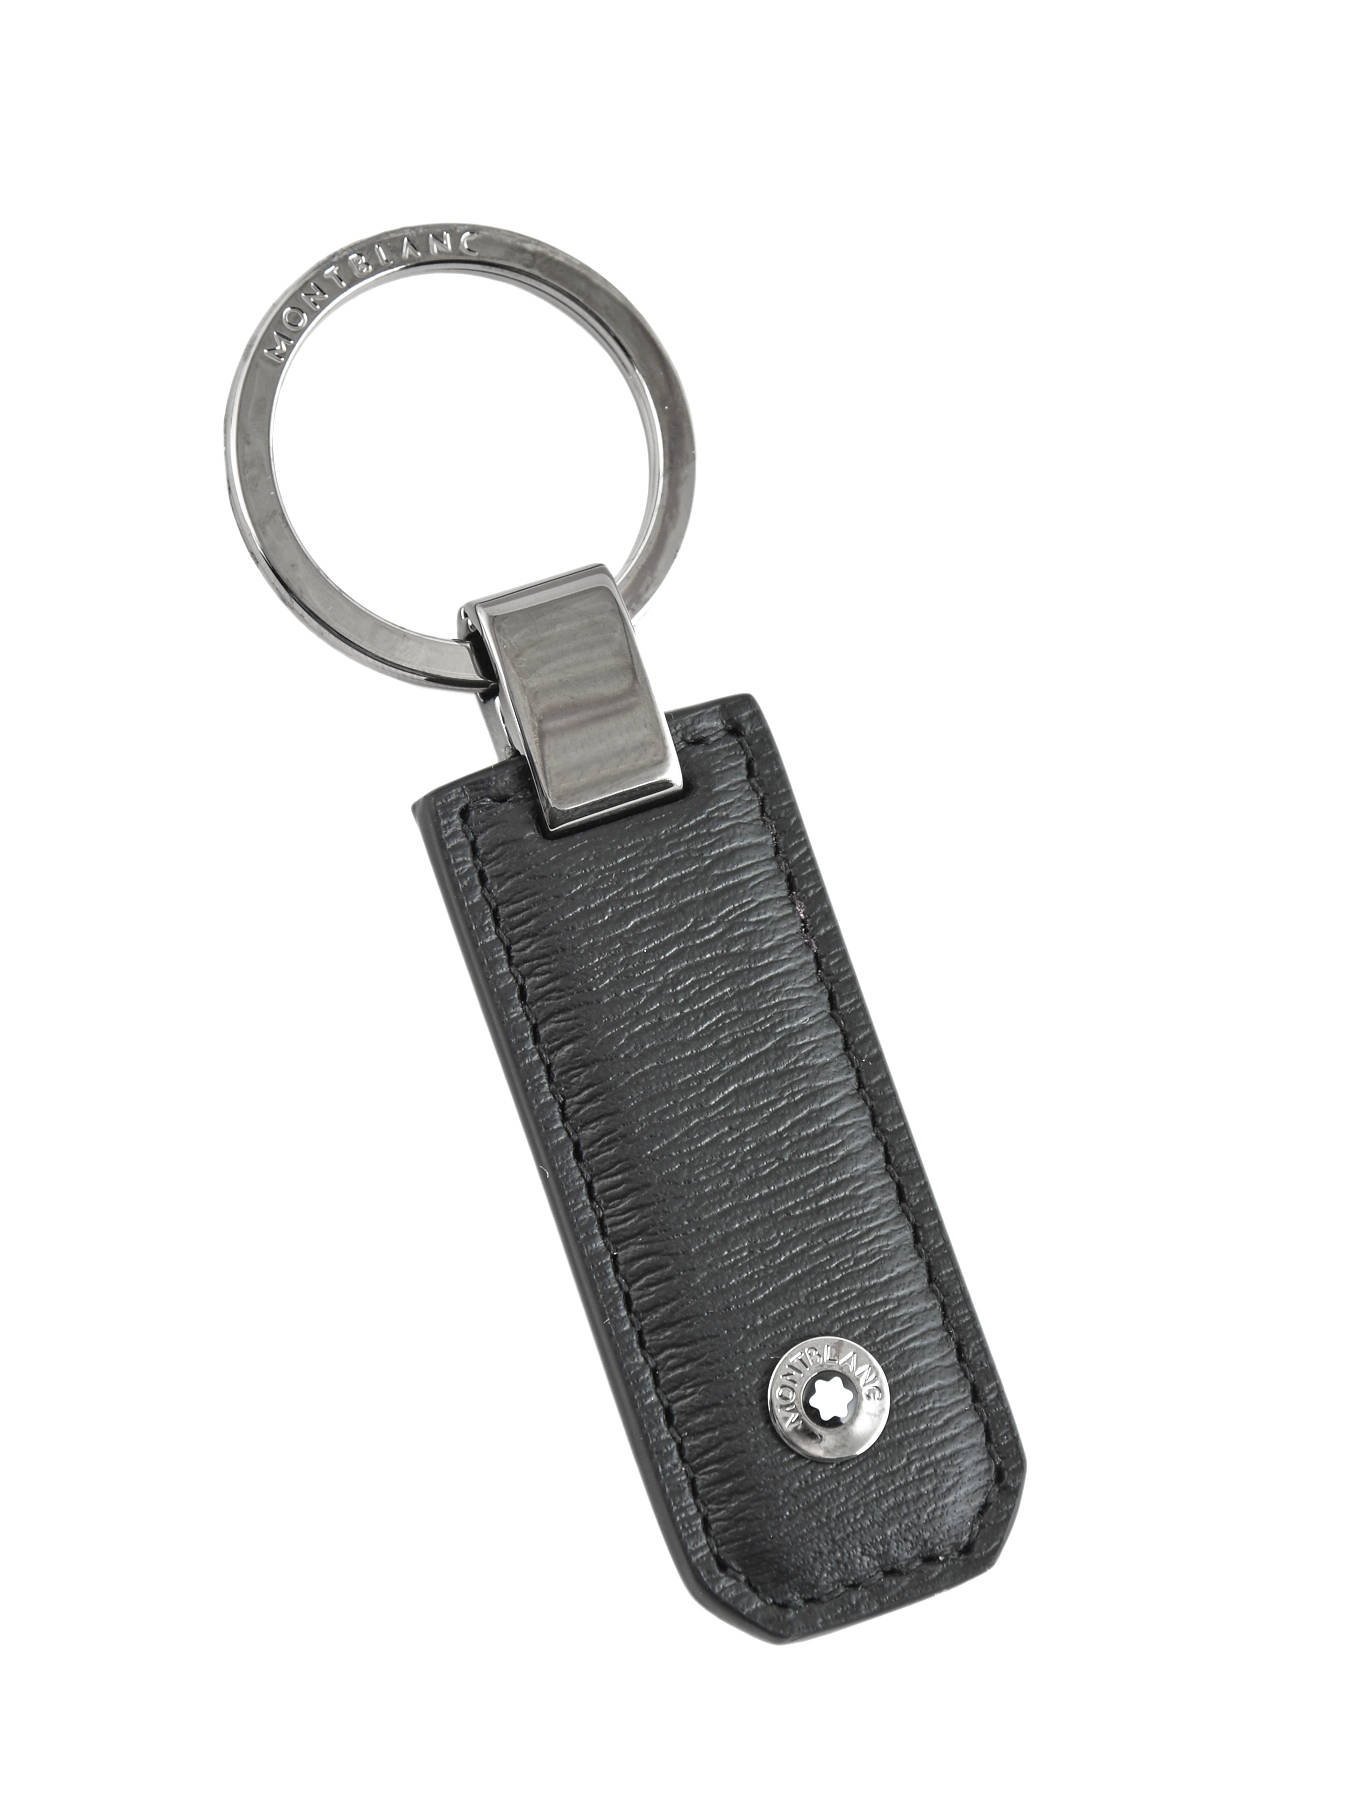 Calf Leather LANCASTER keychains all colors!!